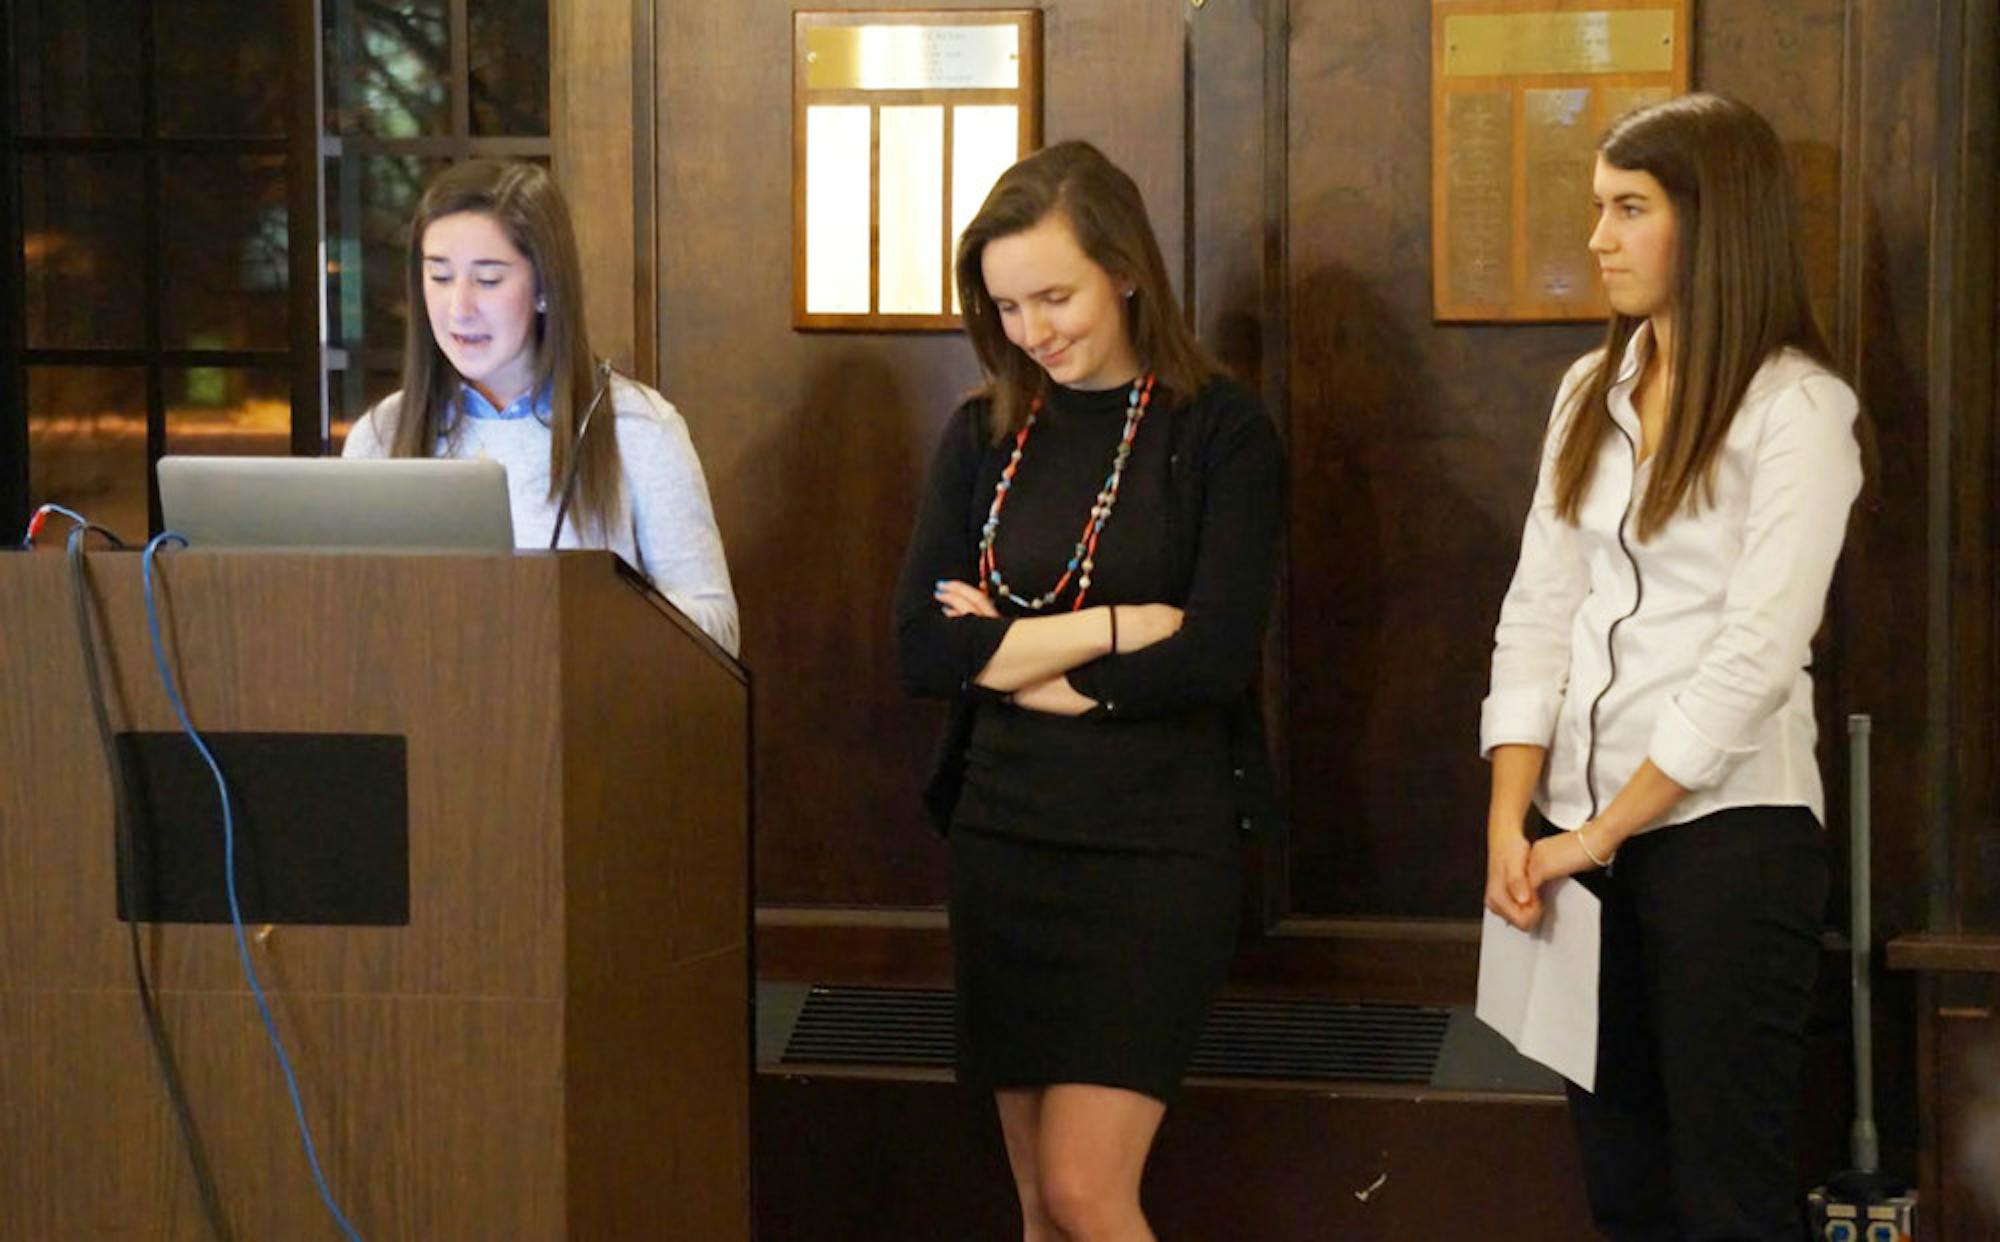 Nursing students Kelly Wilson, Julia Brehl and Janice Heffernan present on their experiences abroad providing medical assistance to people in need.